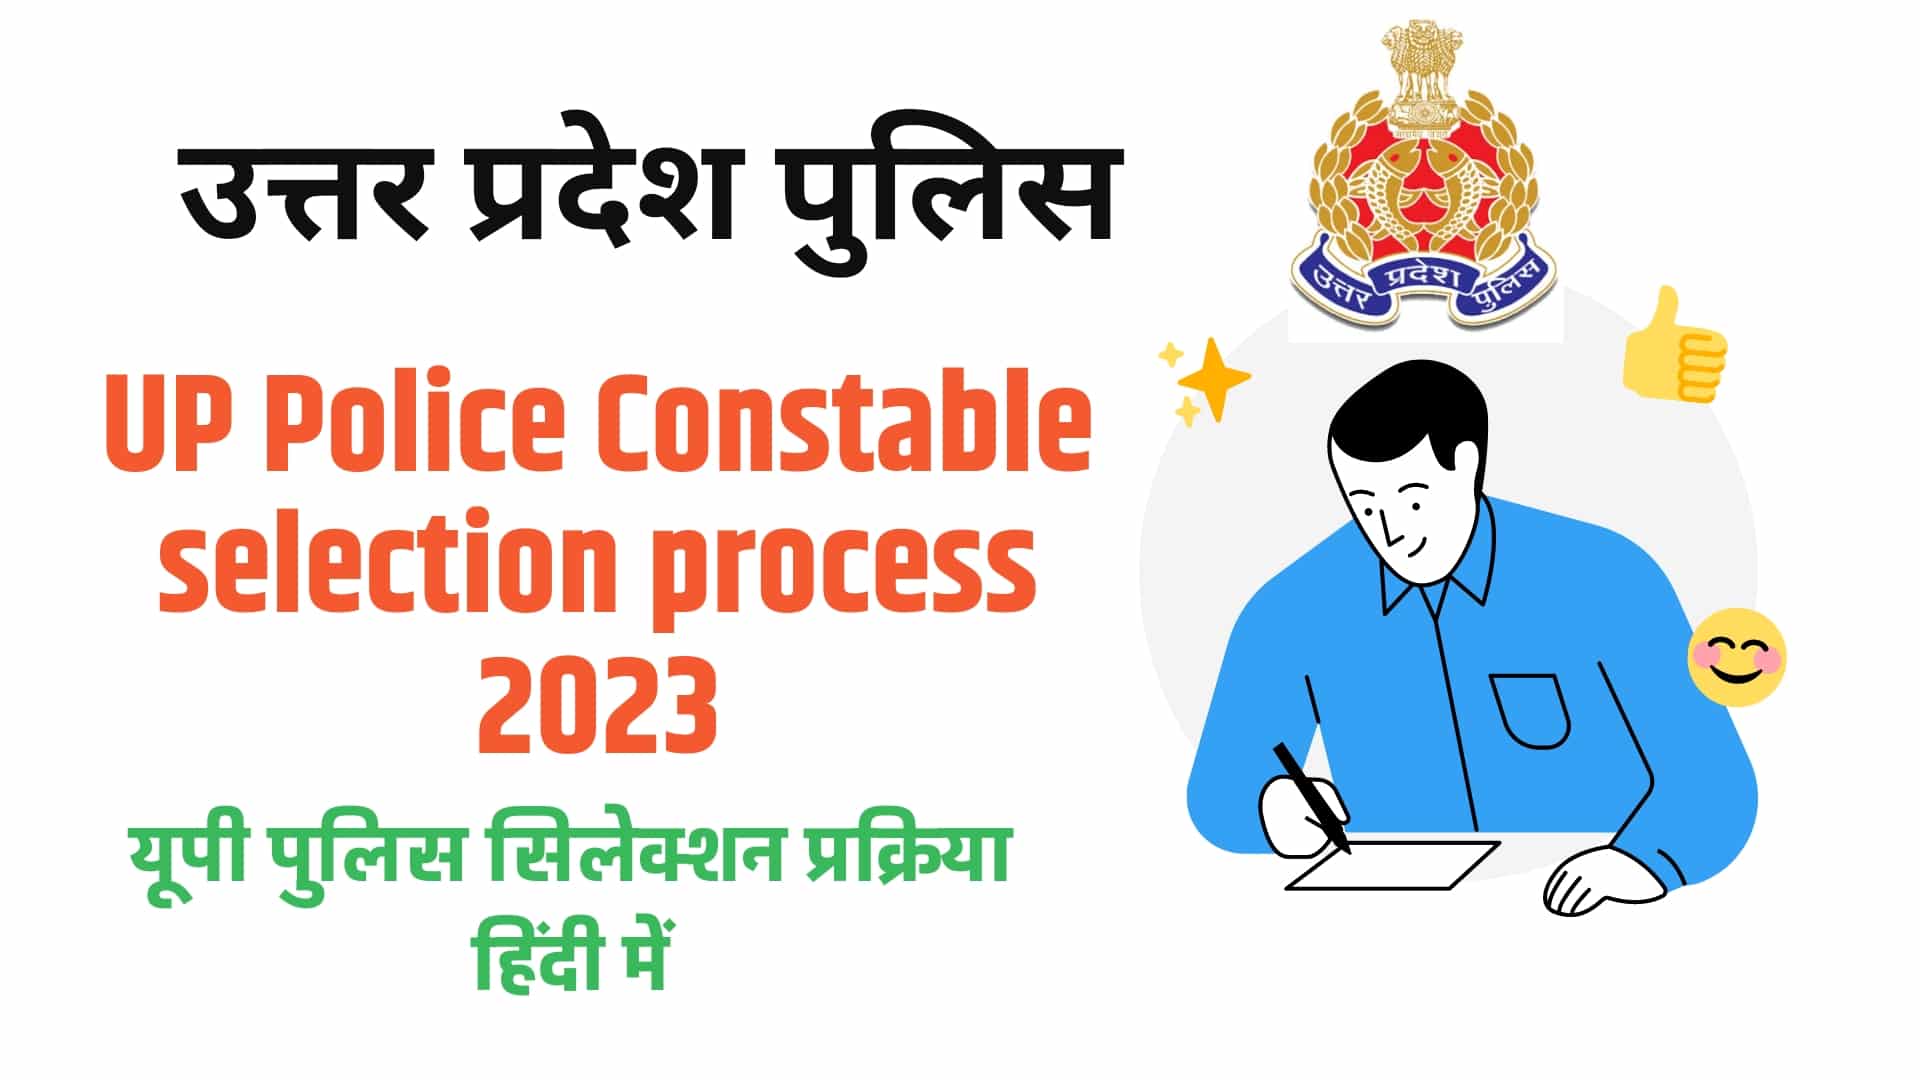 UP Police Constable selection process 2023